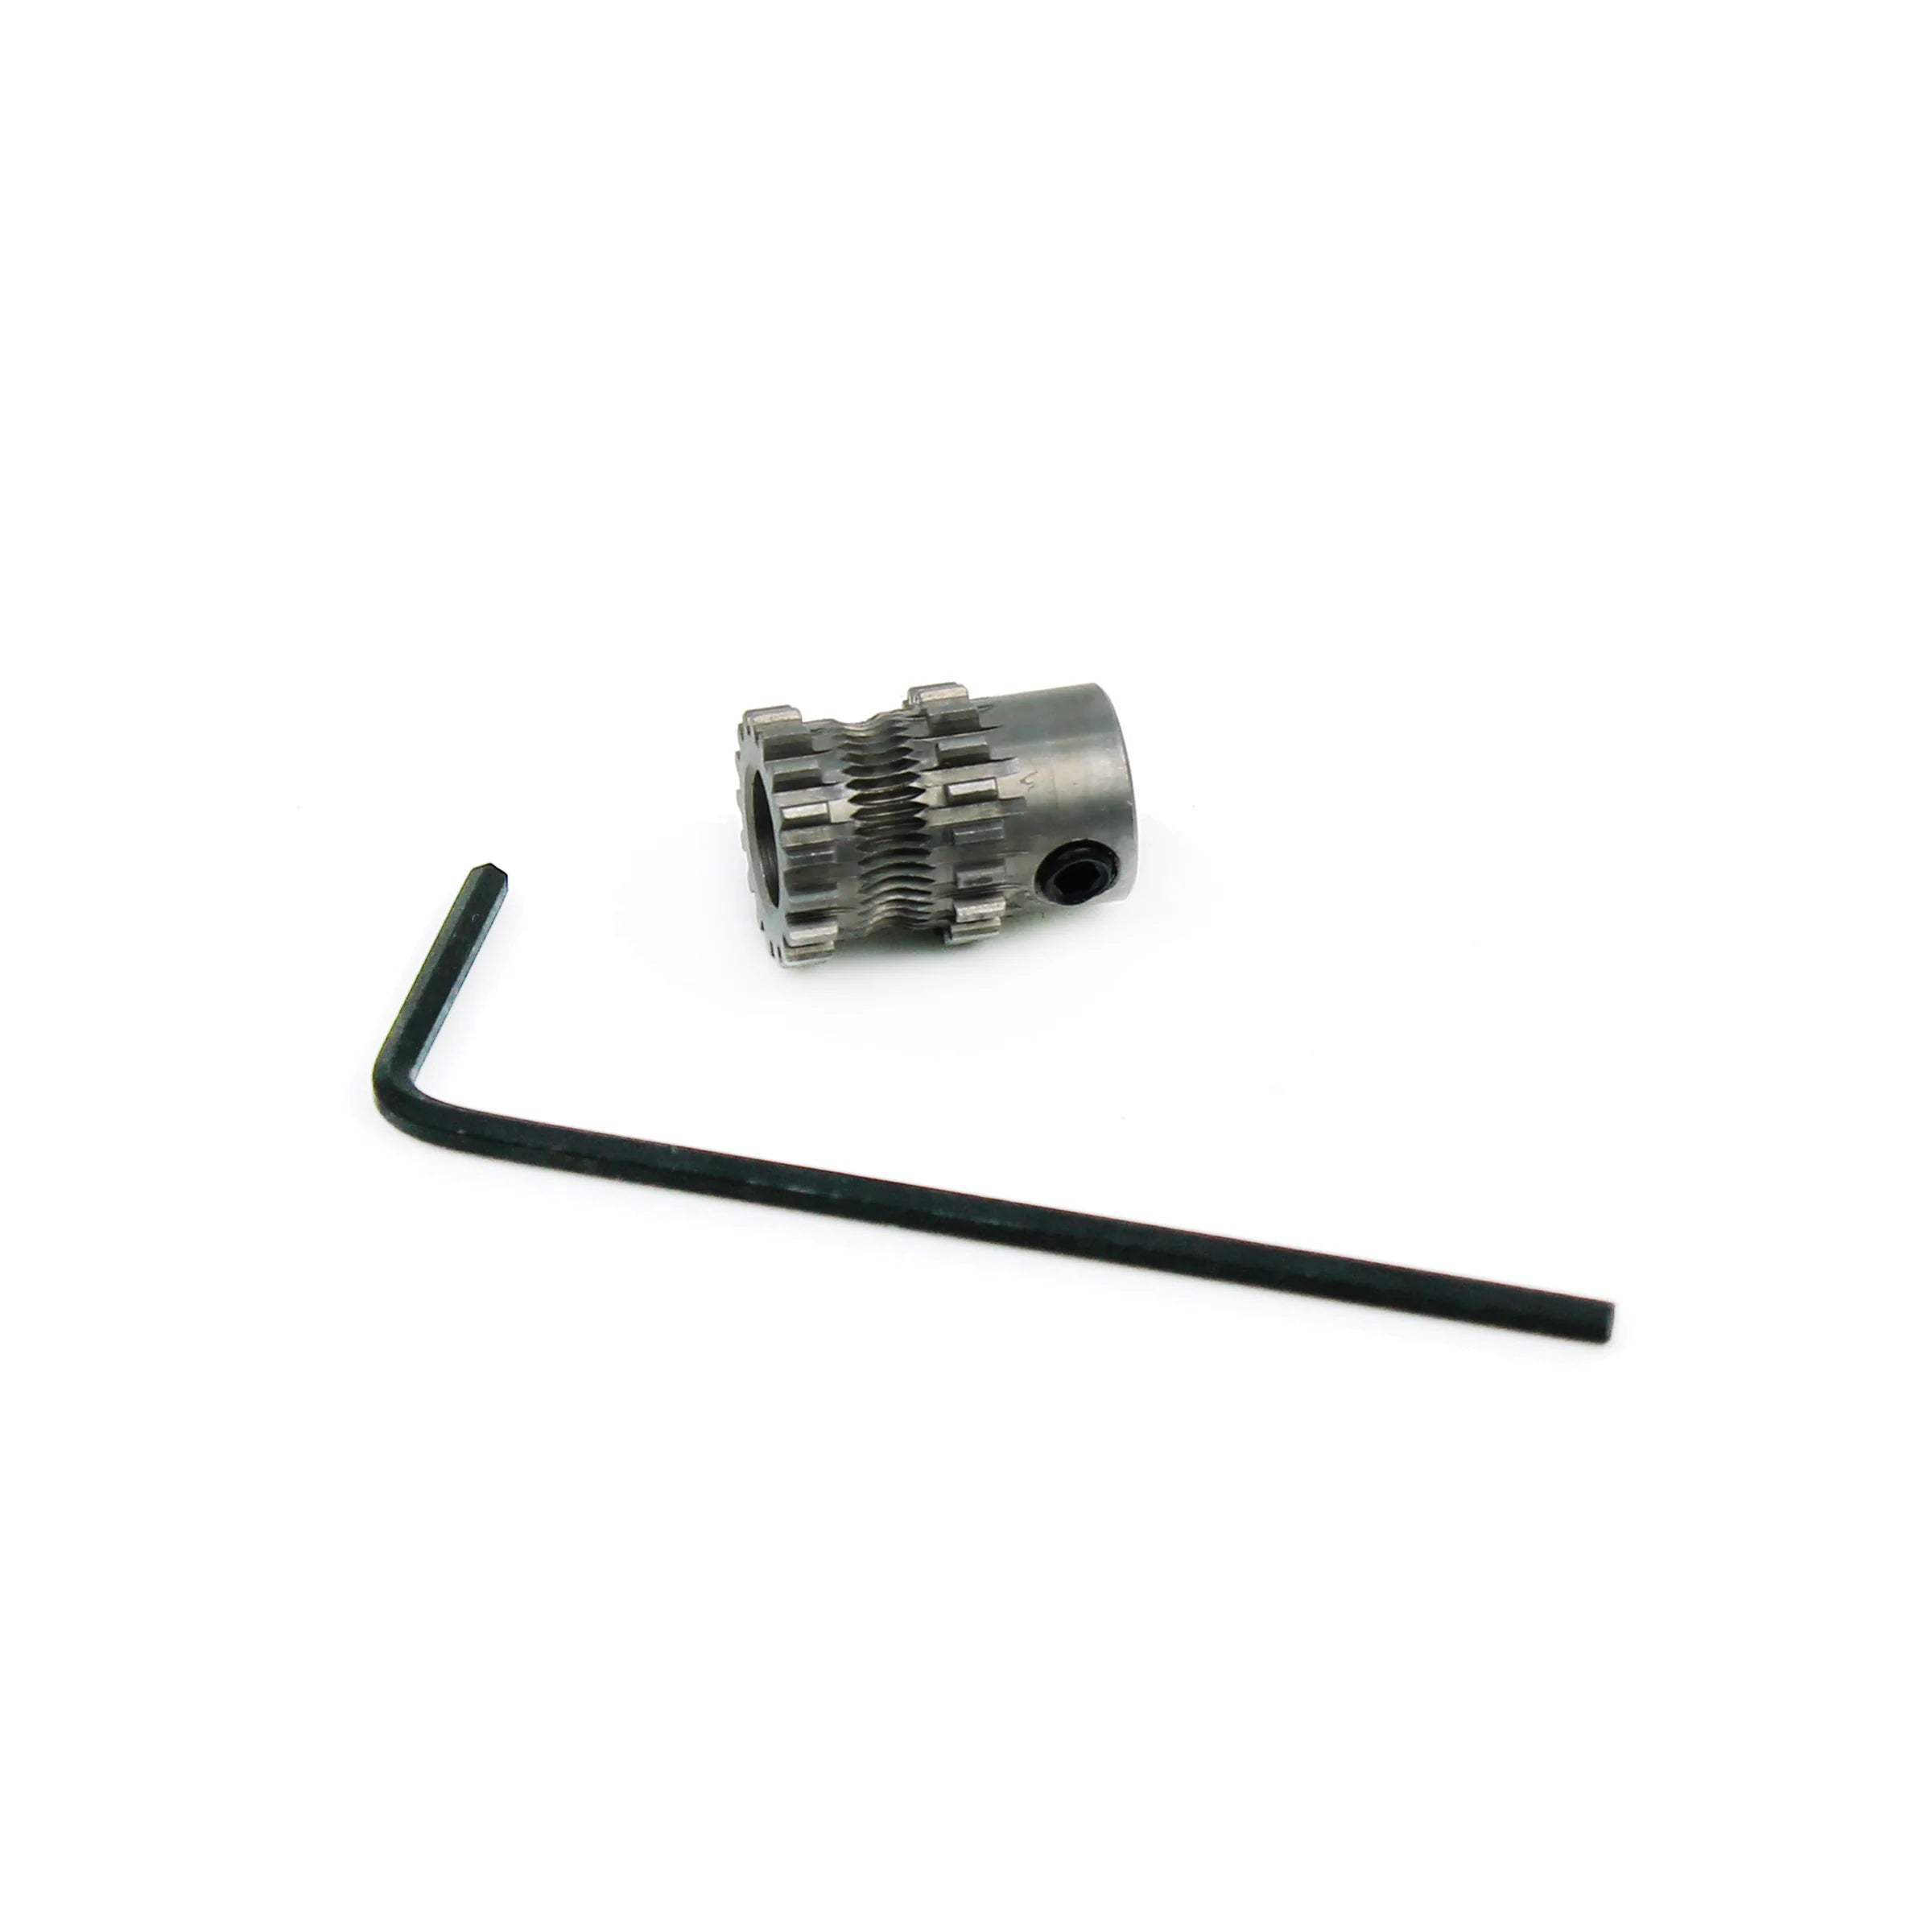 Micro Swiss Motor Gear for Direct Drive Extruder (M2703)